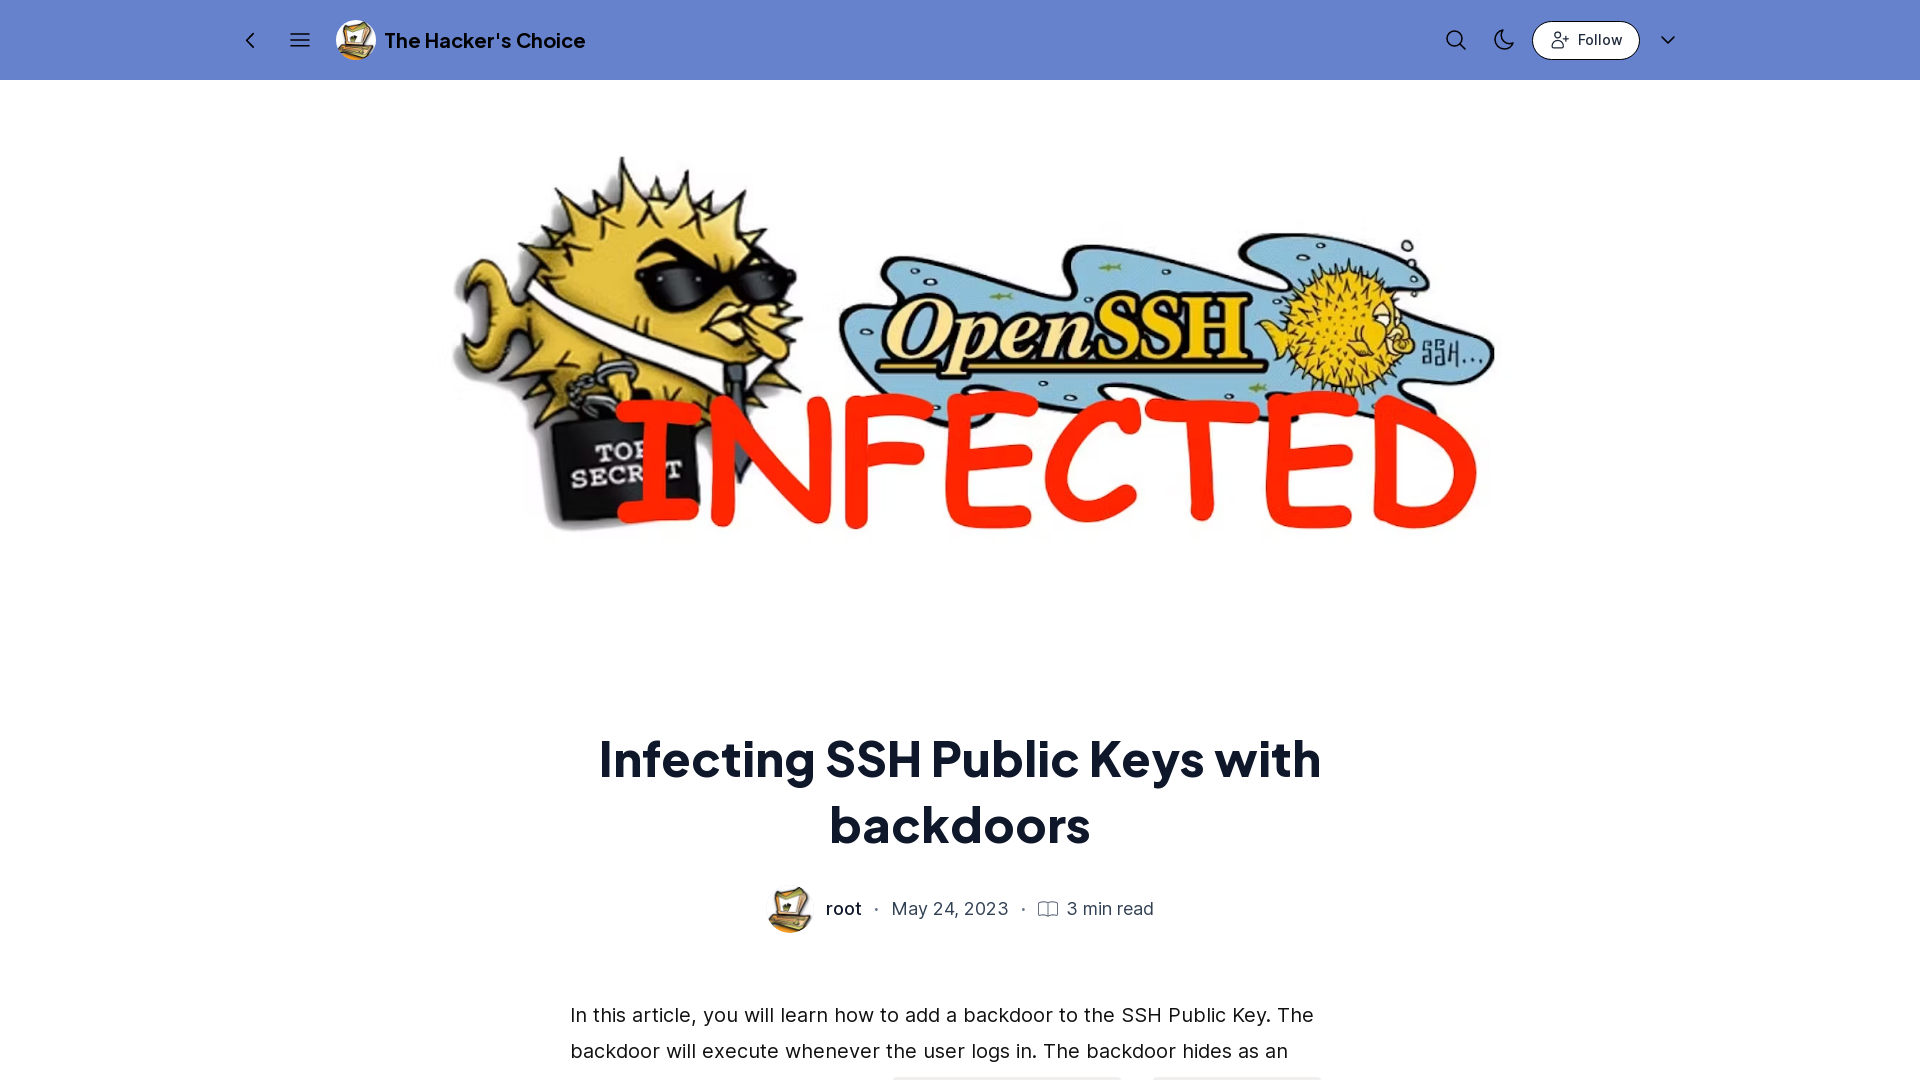 Infecting SSH Public Keys with backdoors